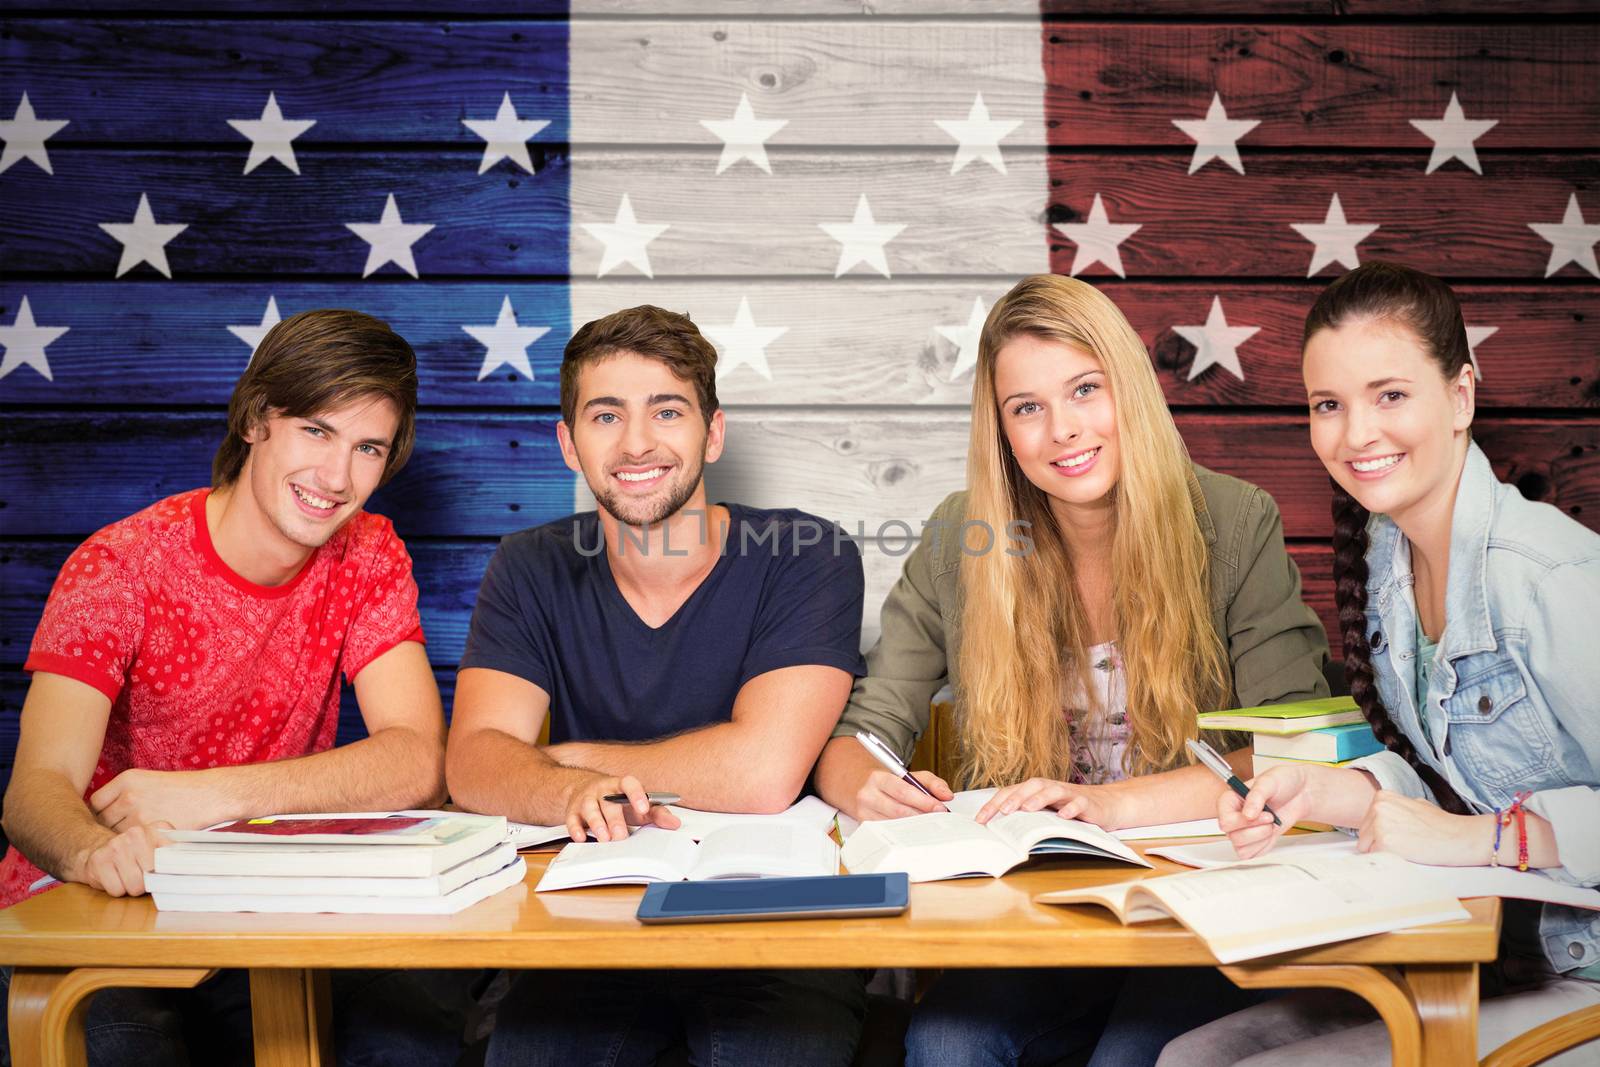 Composite image of students studying by Wavebreakmedia